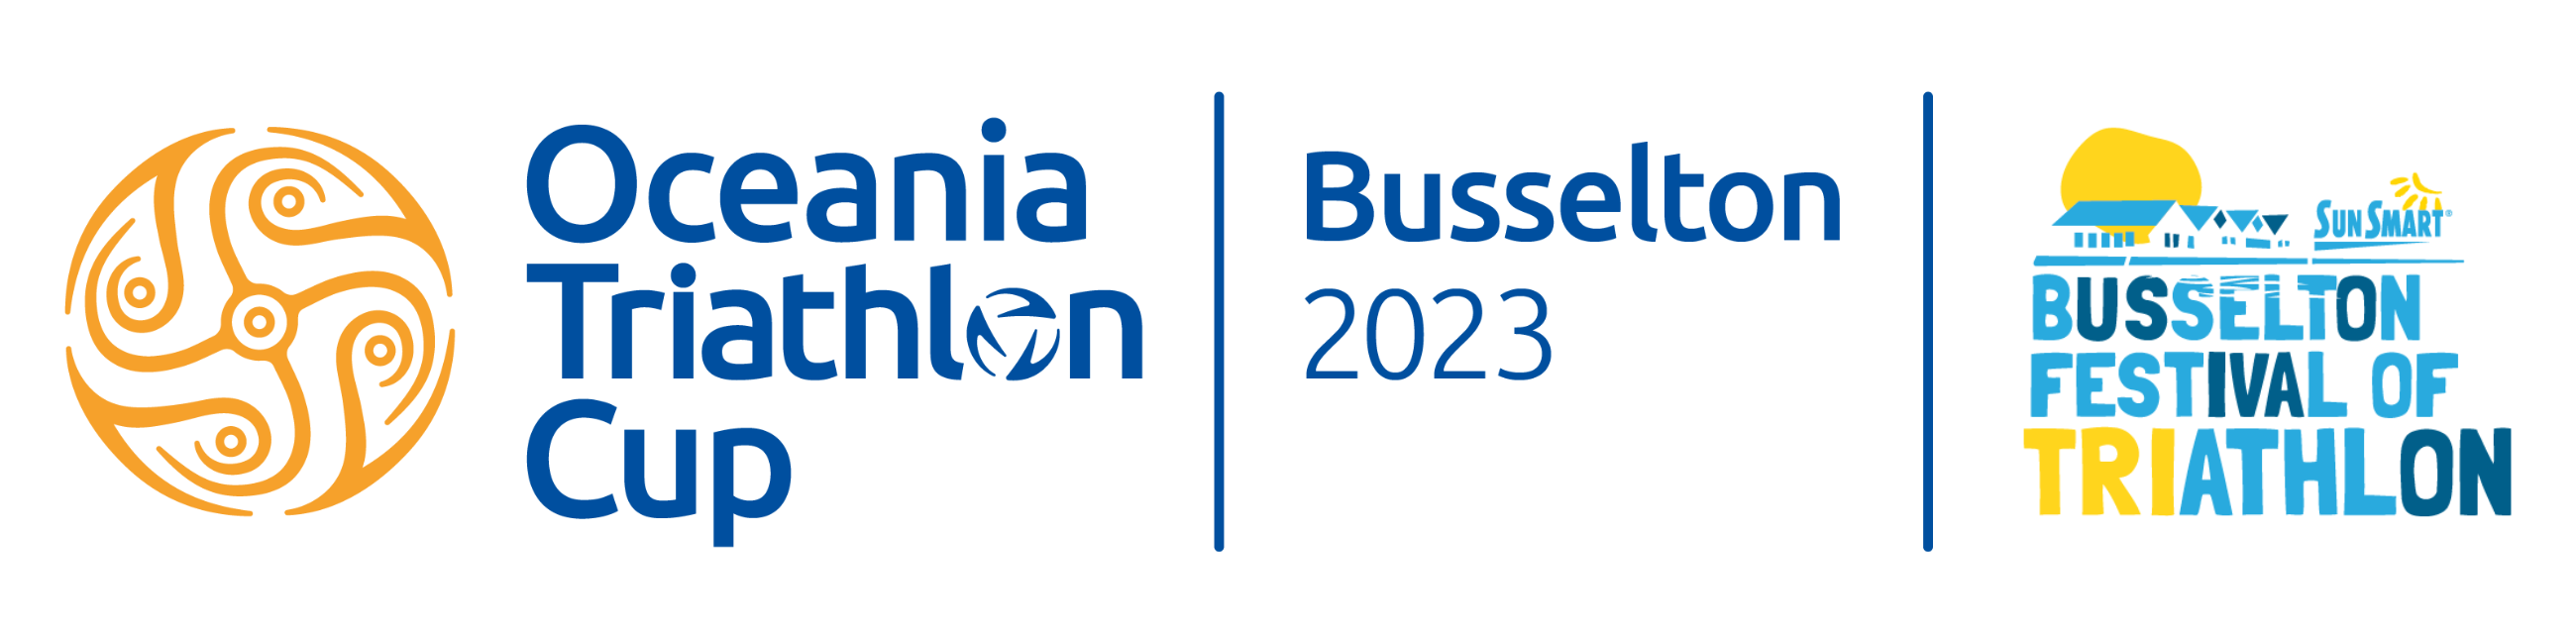 Oceania Triathlon Cup and Oceania Para Cup to be held as part of the 2023 SunSmart Busselton Festival of Triathlon